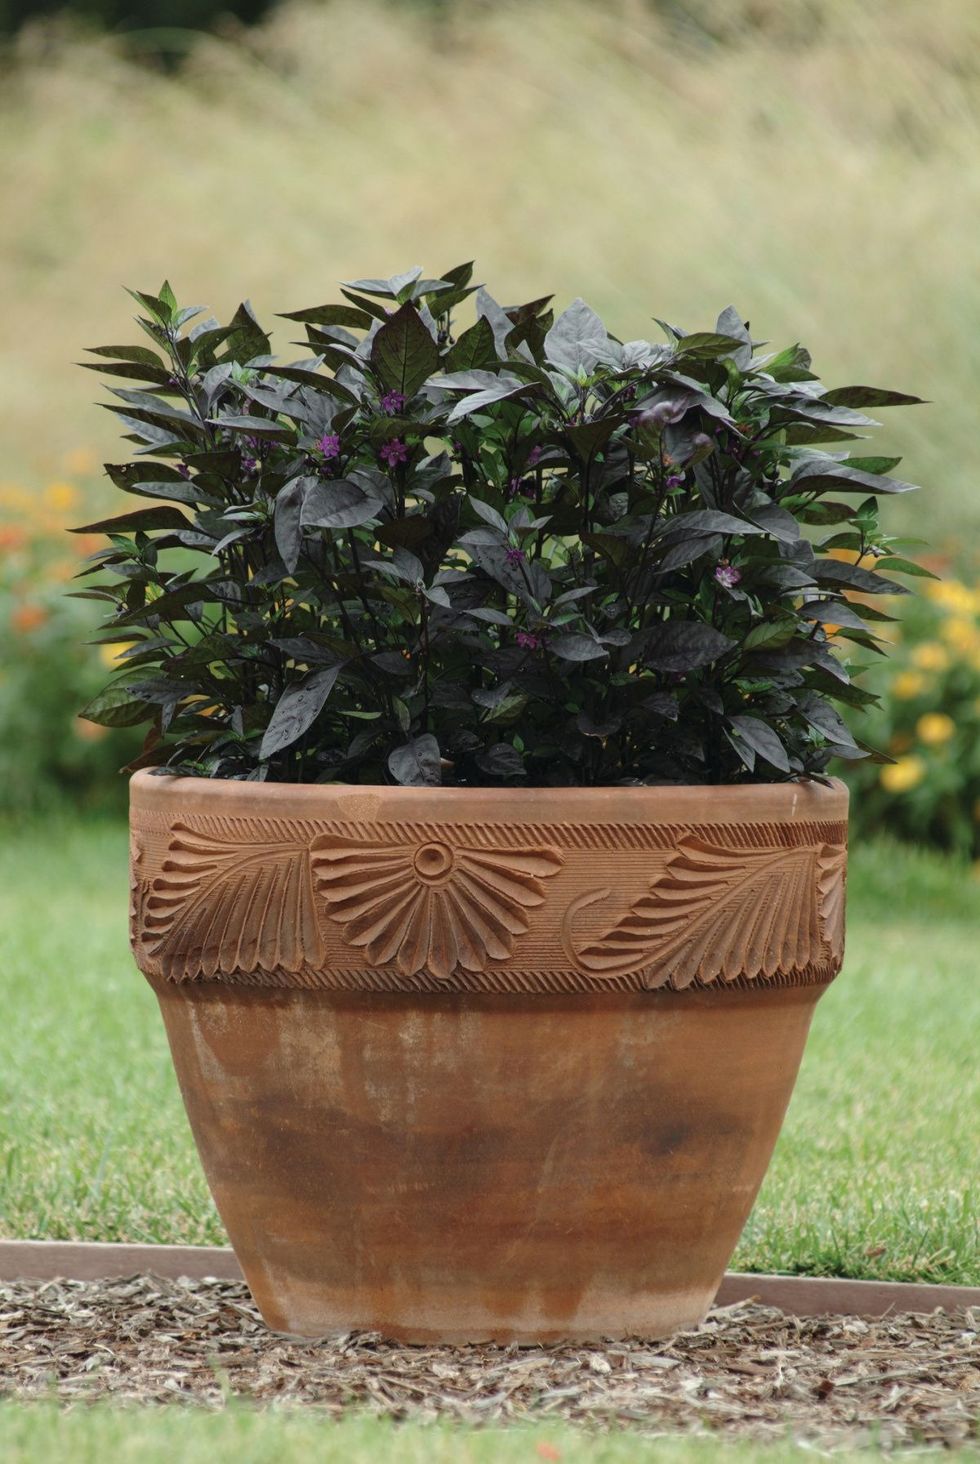 https://hips.hearstapps.com/hmg-prod/images/container-plants-ornamental-pepper-1659381983.jpeg?crop=1xw:1xh;center,top&resize=980:*